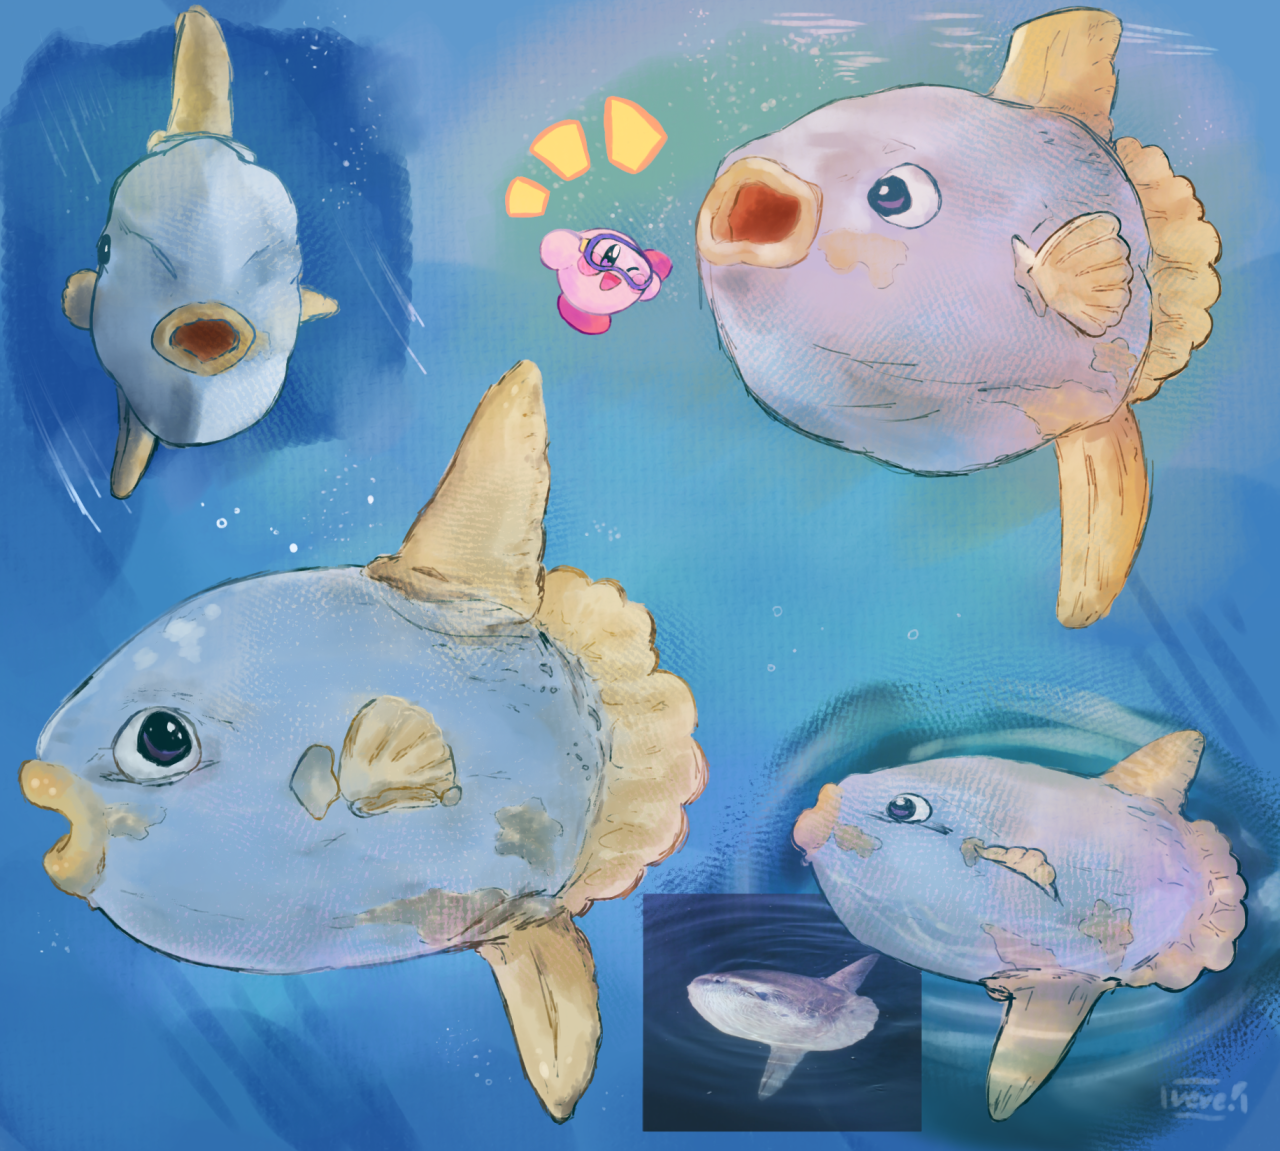 veve :] — kine is based off mola mola sunfish, which are